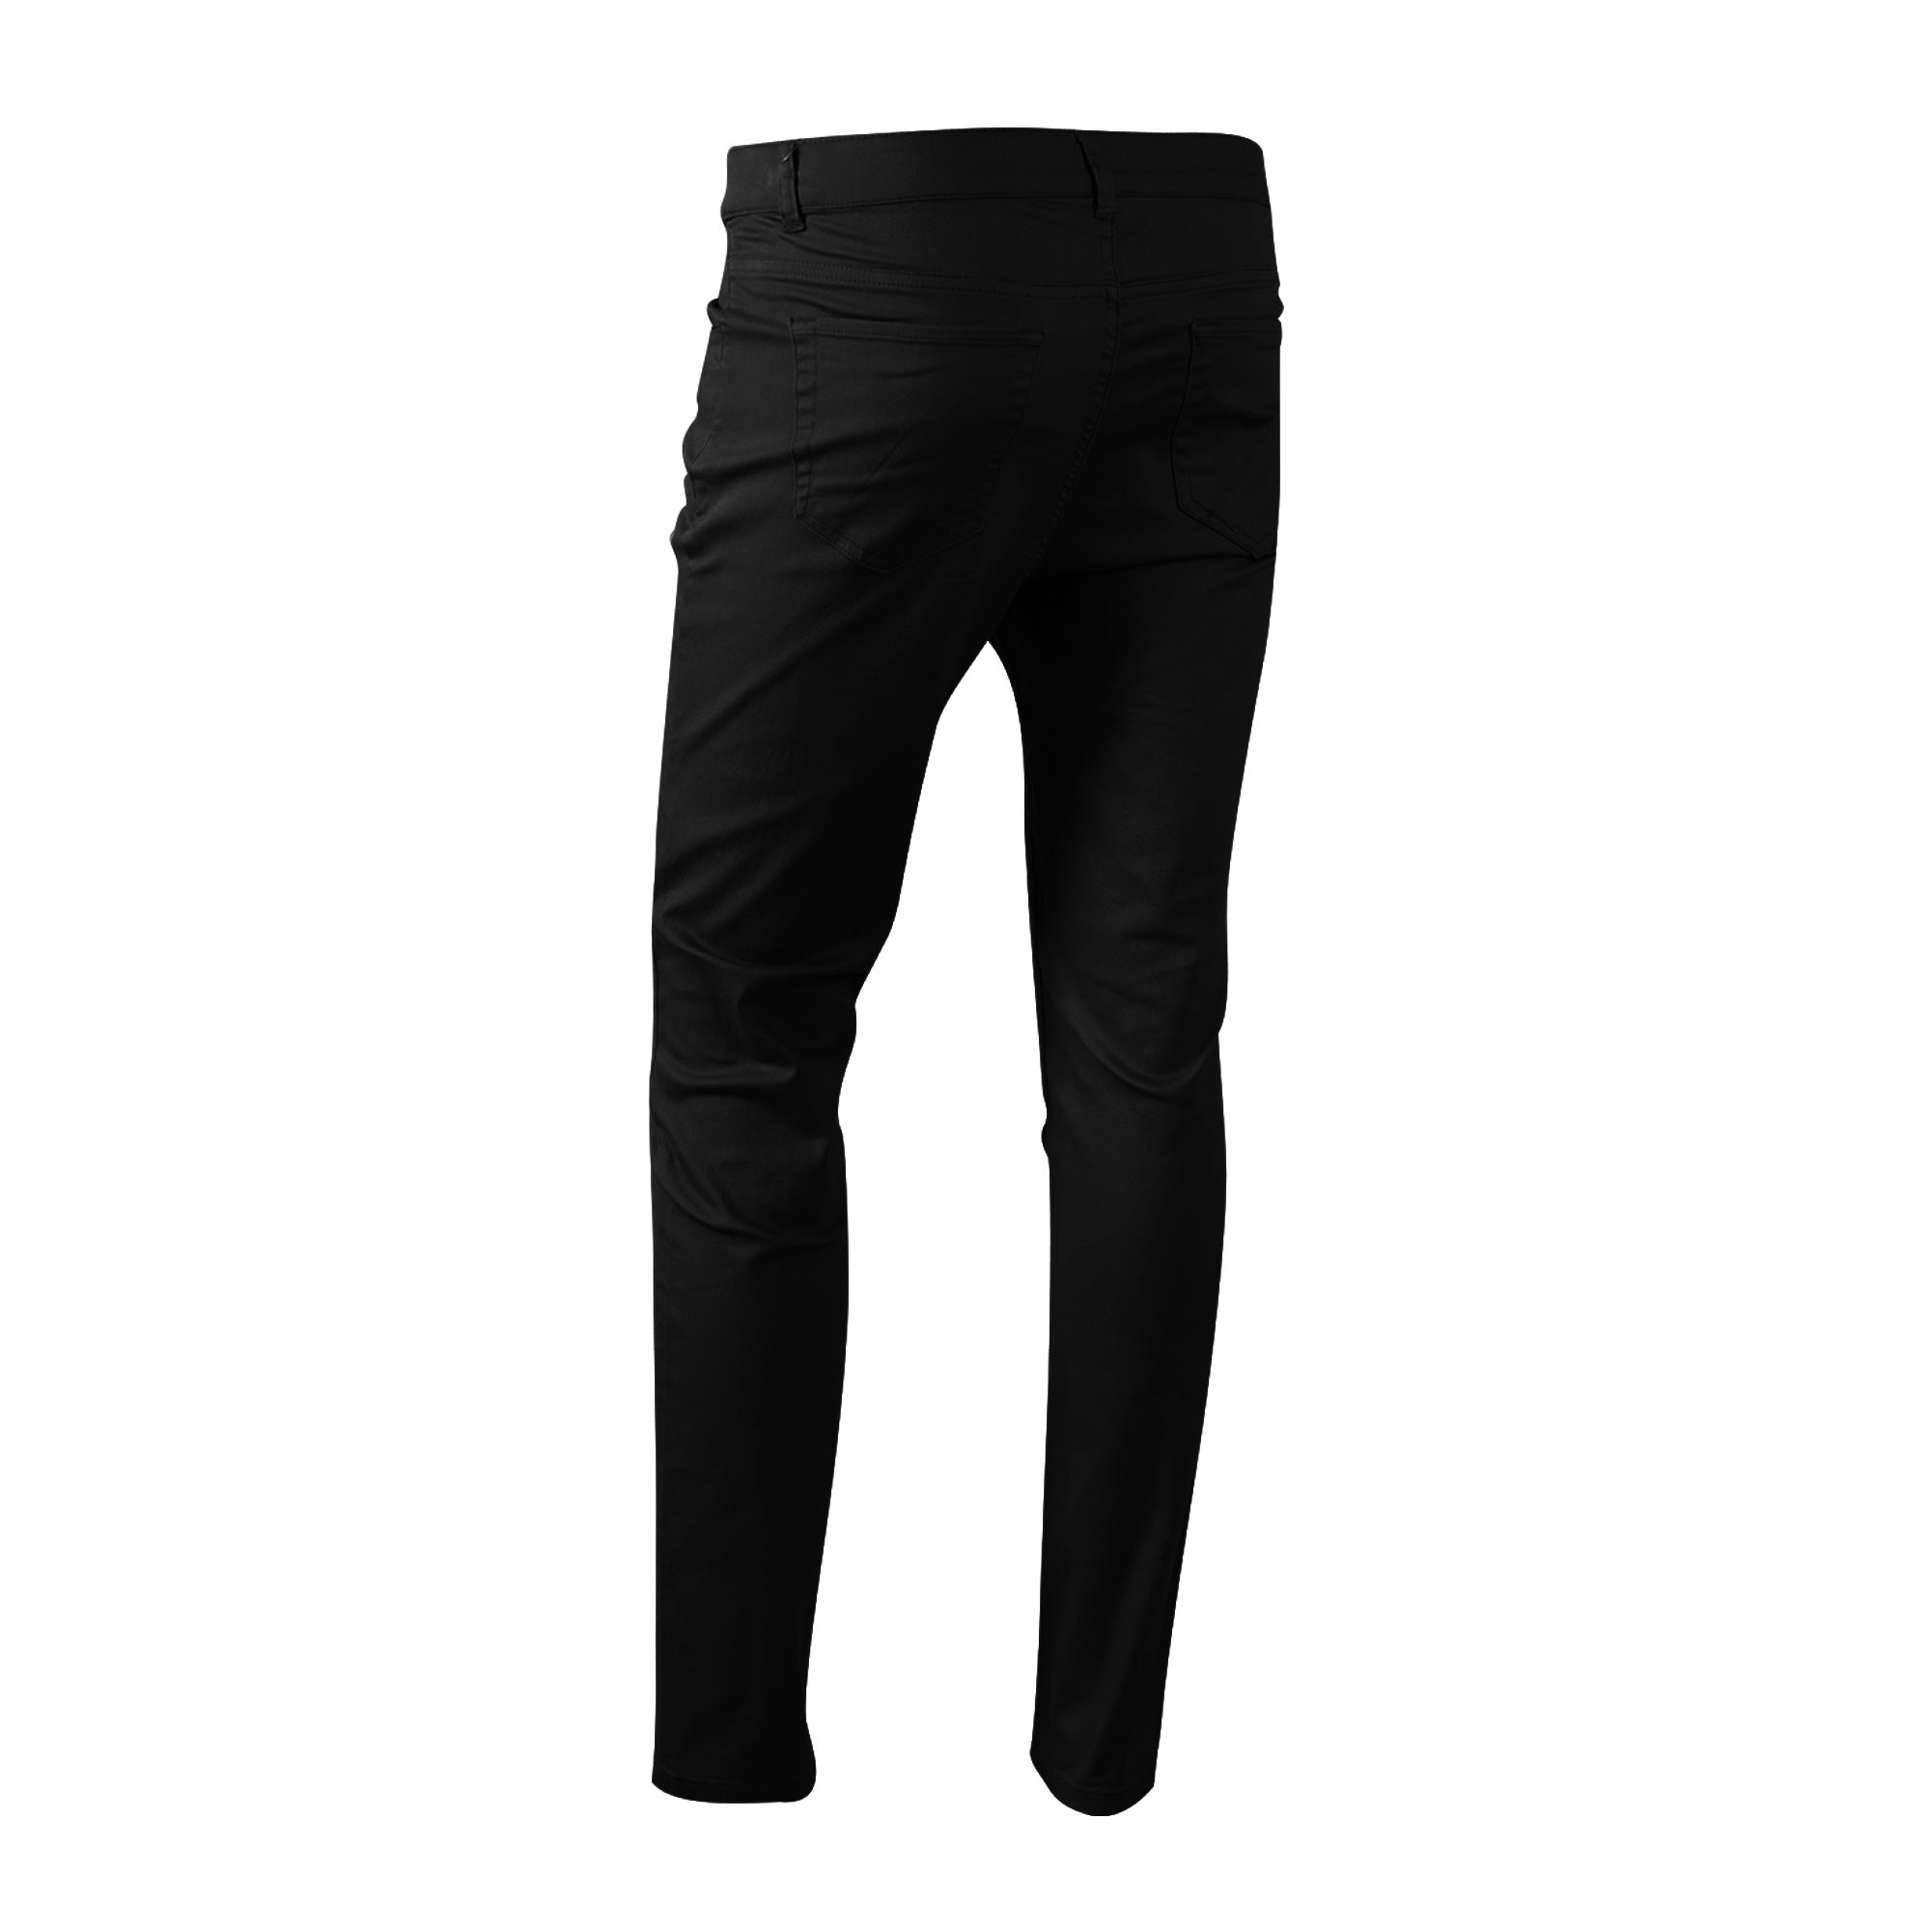 Women's Mid Rise Slim Tapered Jeans